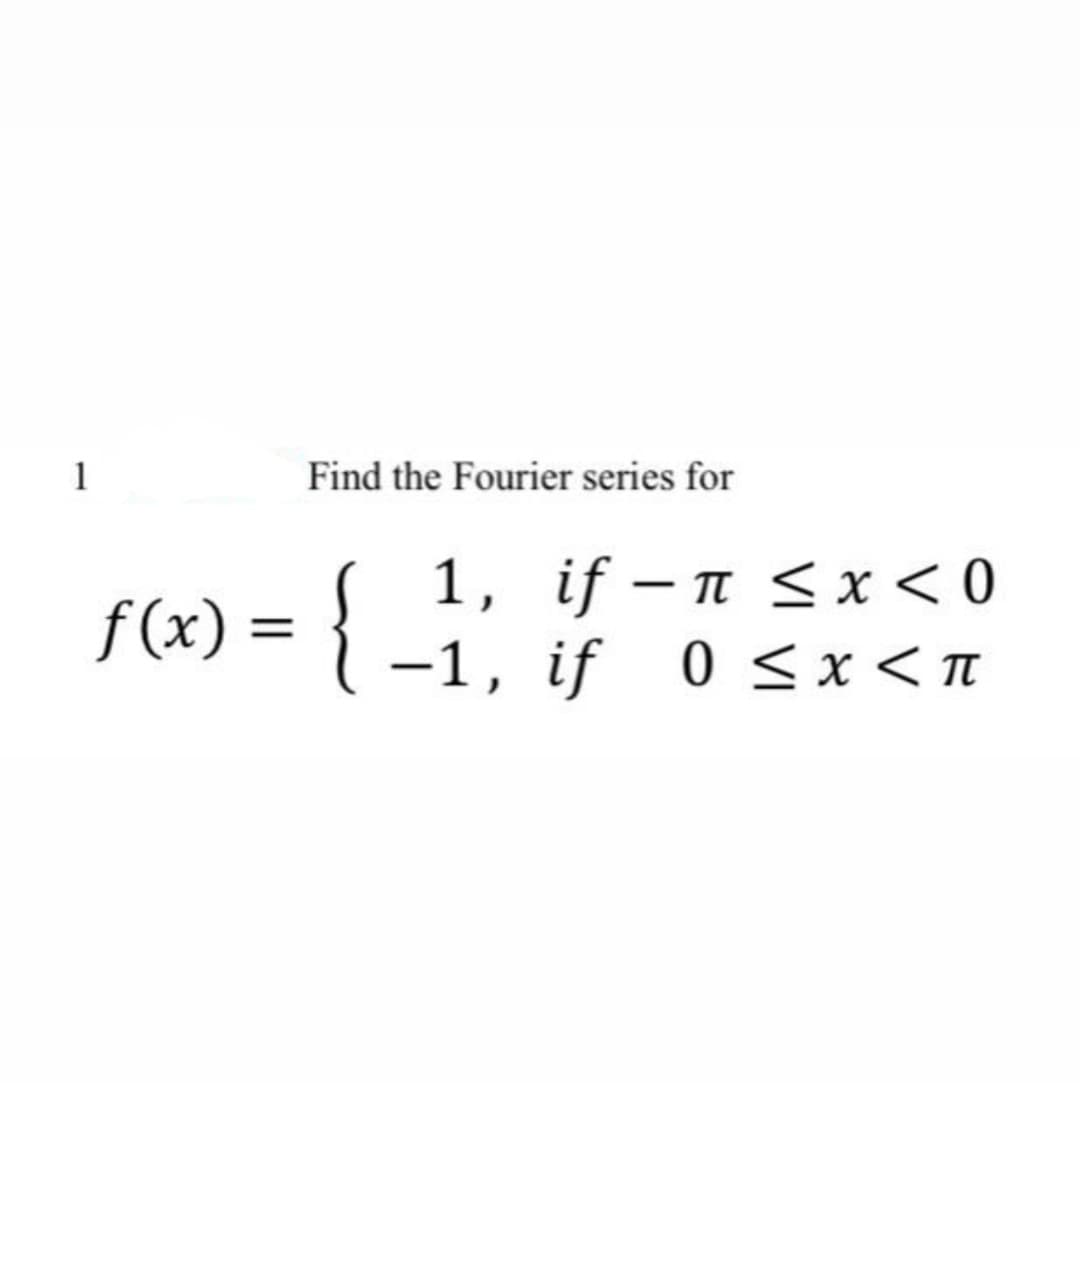 1
Find the Fourier series for
{
1, if – n <x < 0
-1, if 0 <x<n
f (x)
|
